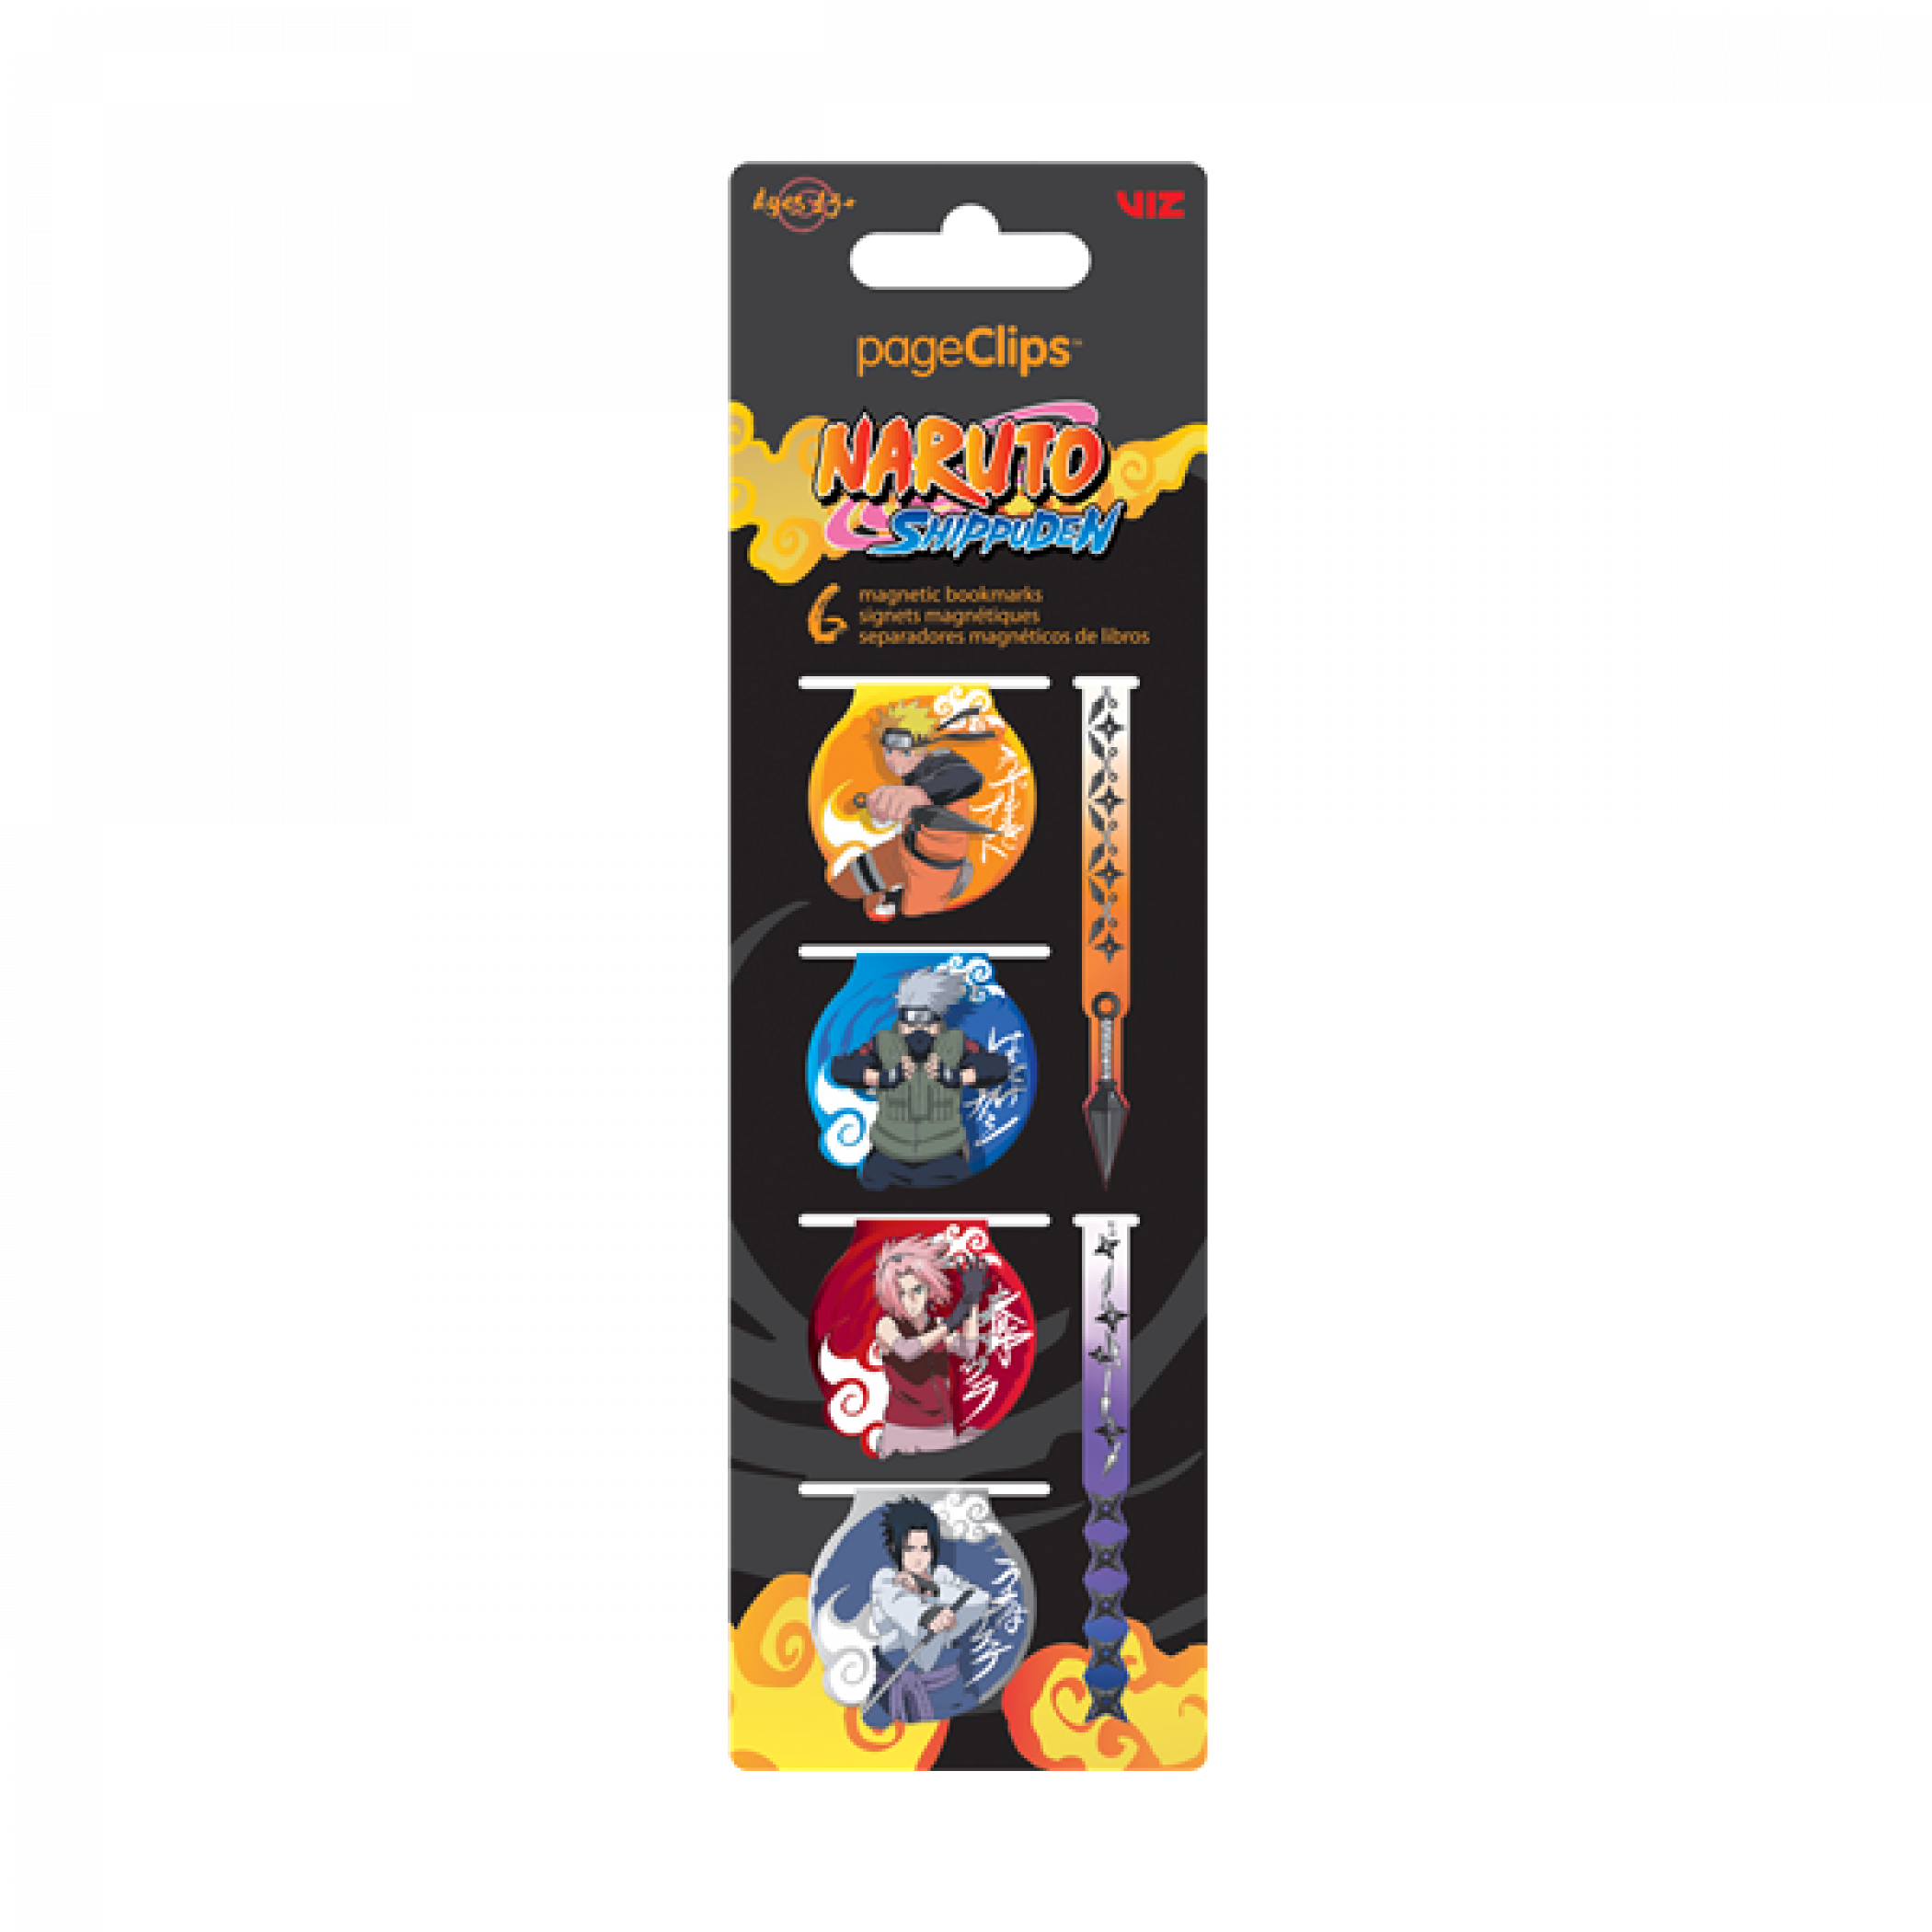 Naruto Shippuden Characters Magnetic Page Clip Bookmarks 6-Pack